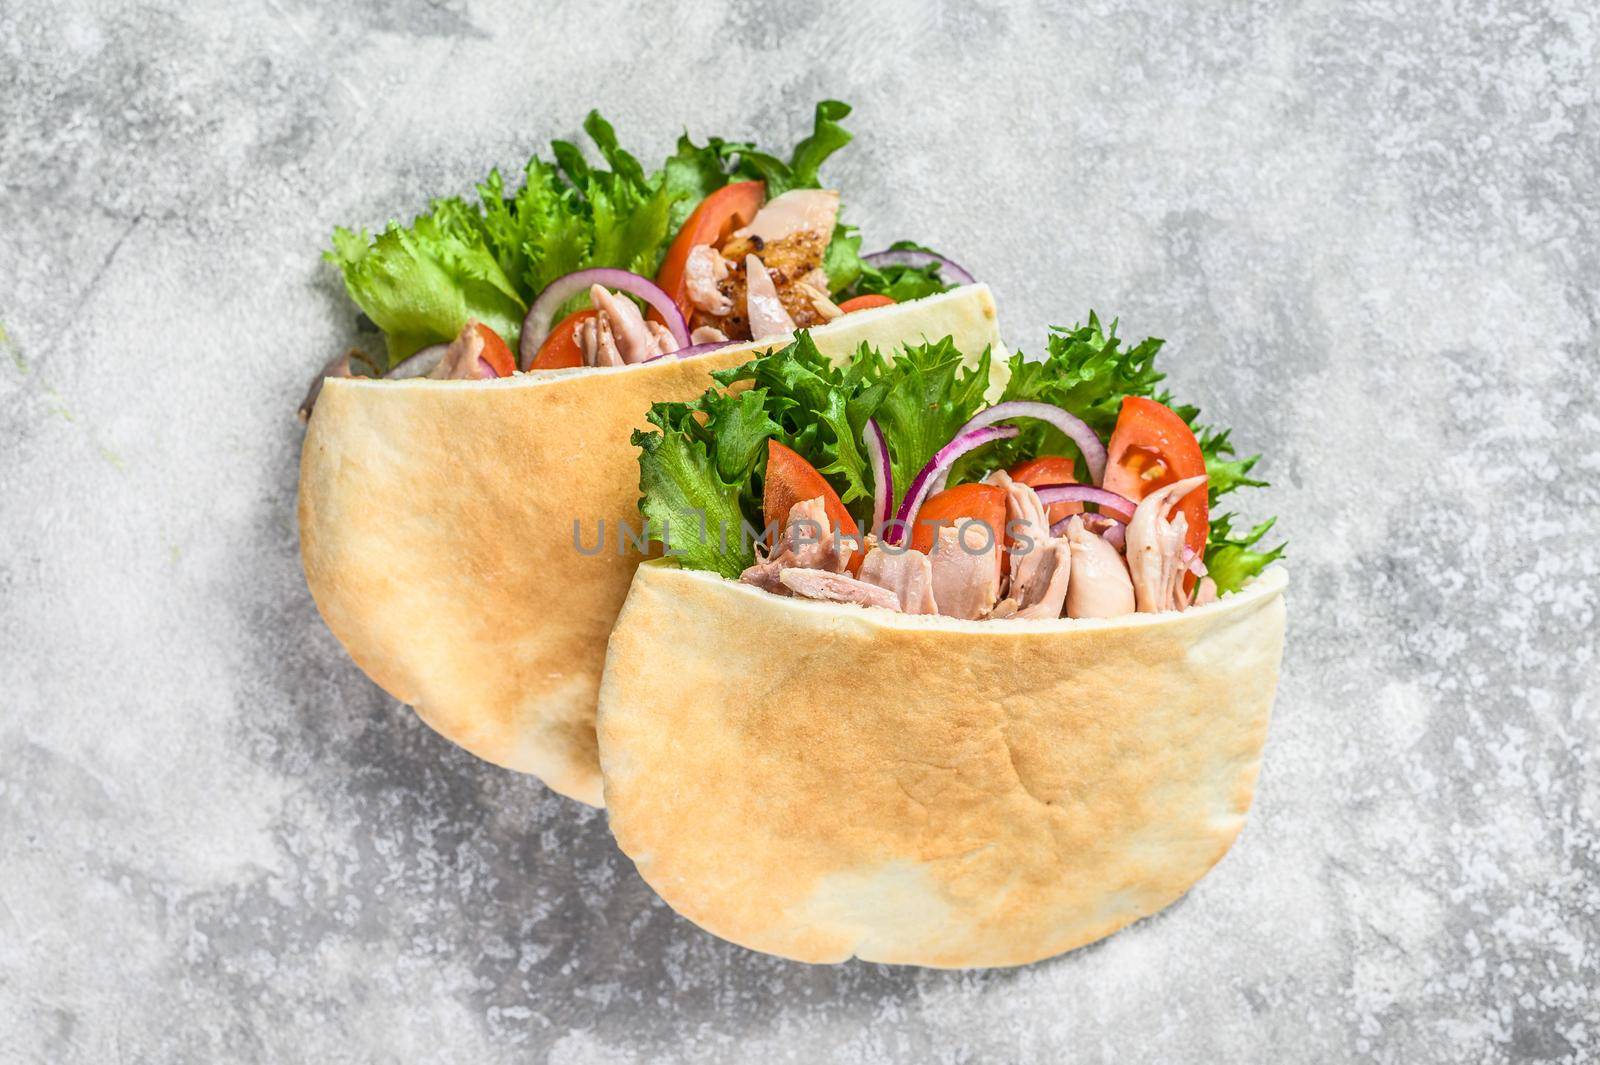 Doner kebab with grilled chicken meat and vegetables in pita bread. Gray background. Top view.